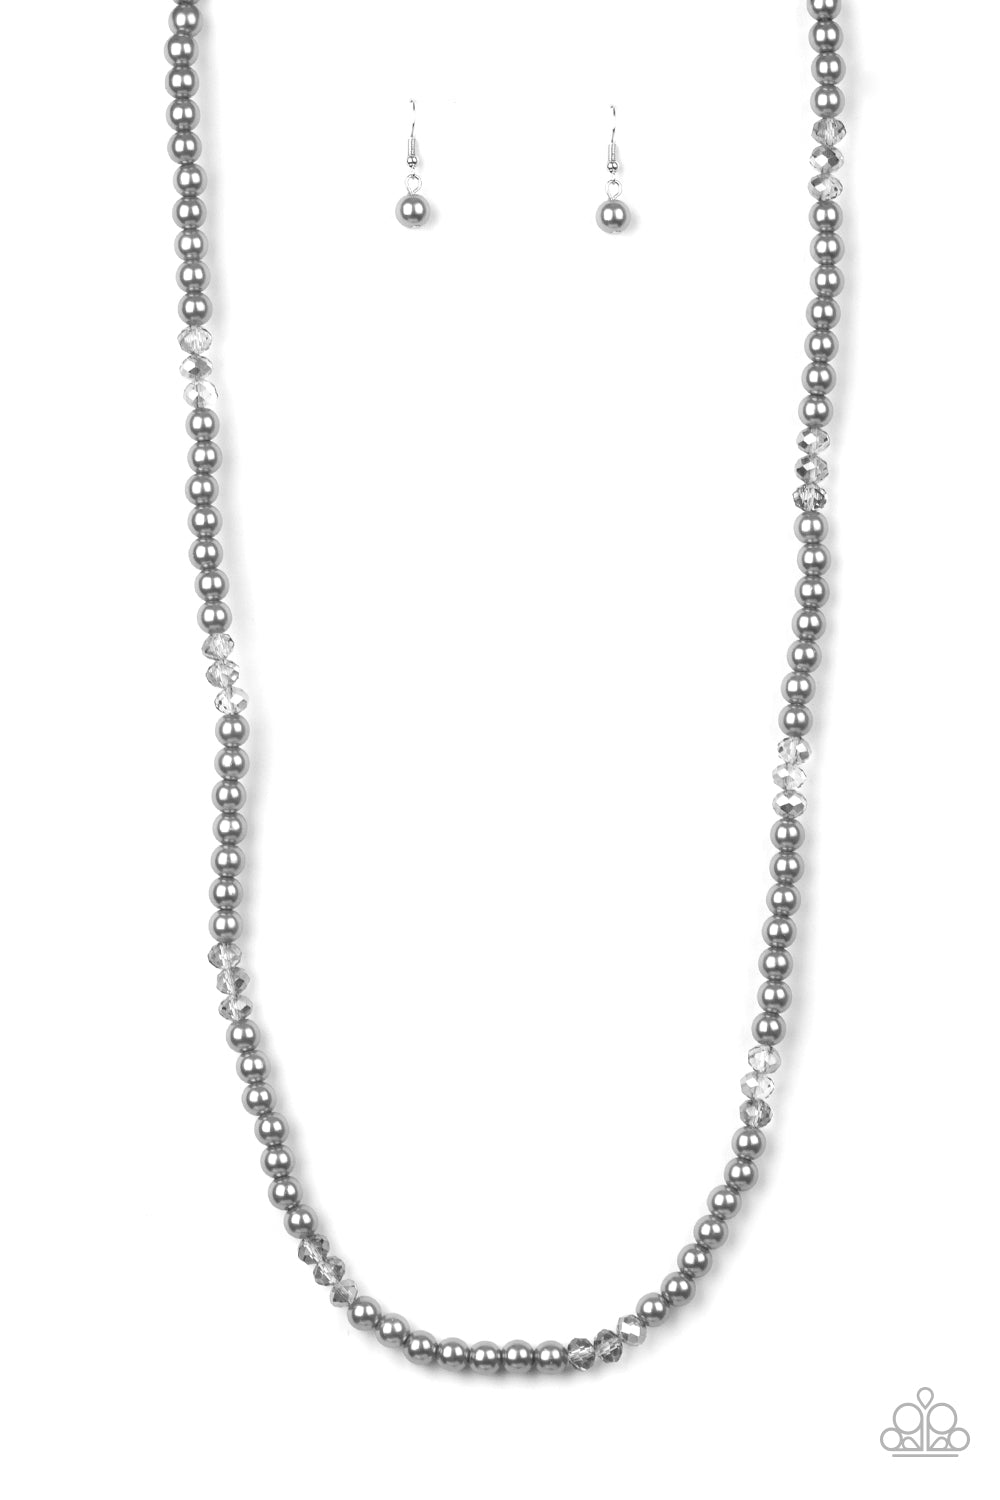 Necklace Set - Girls Have More FUNDS - Silver